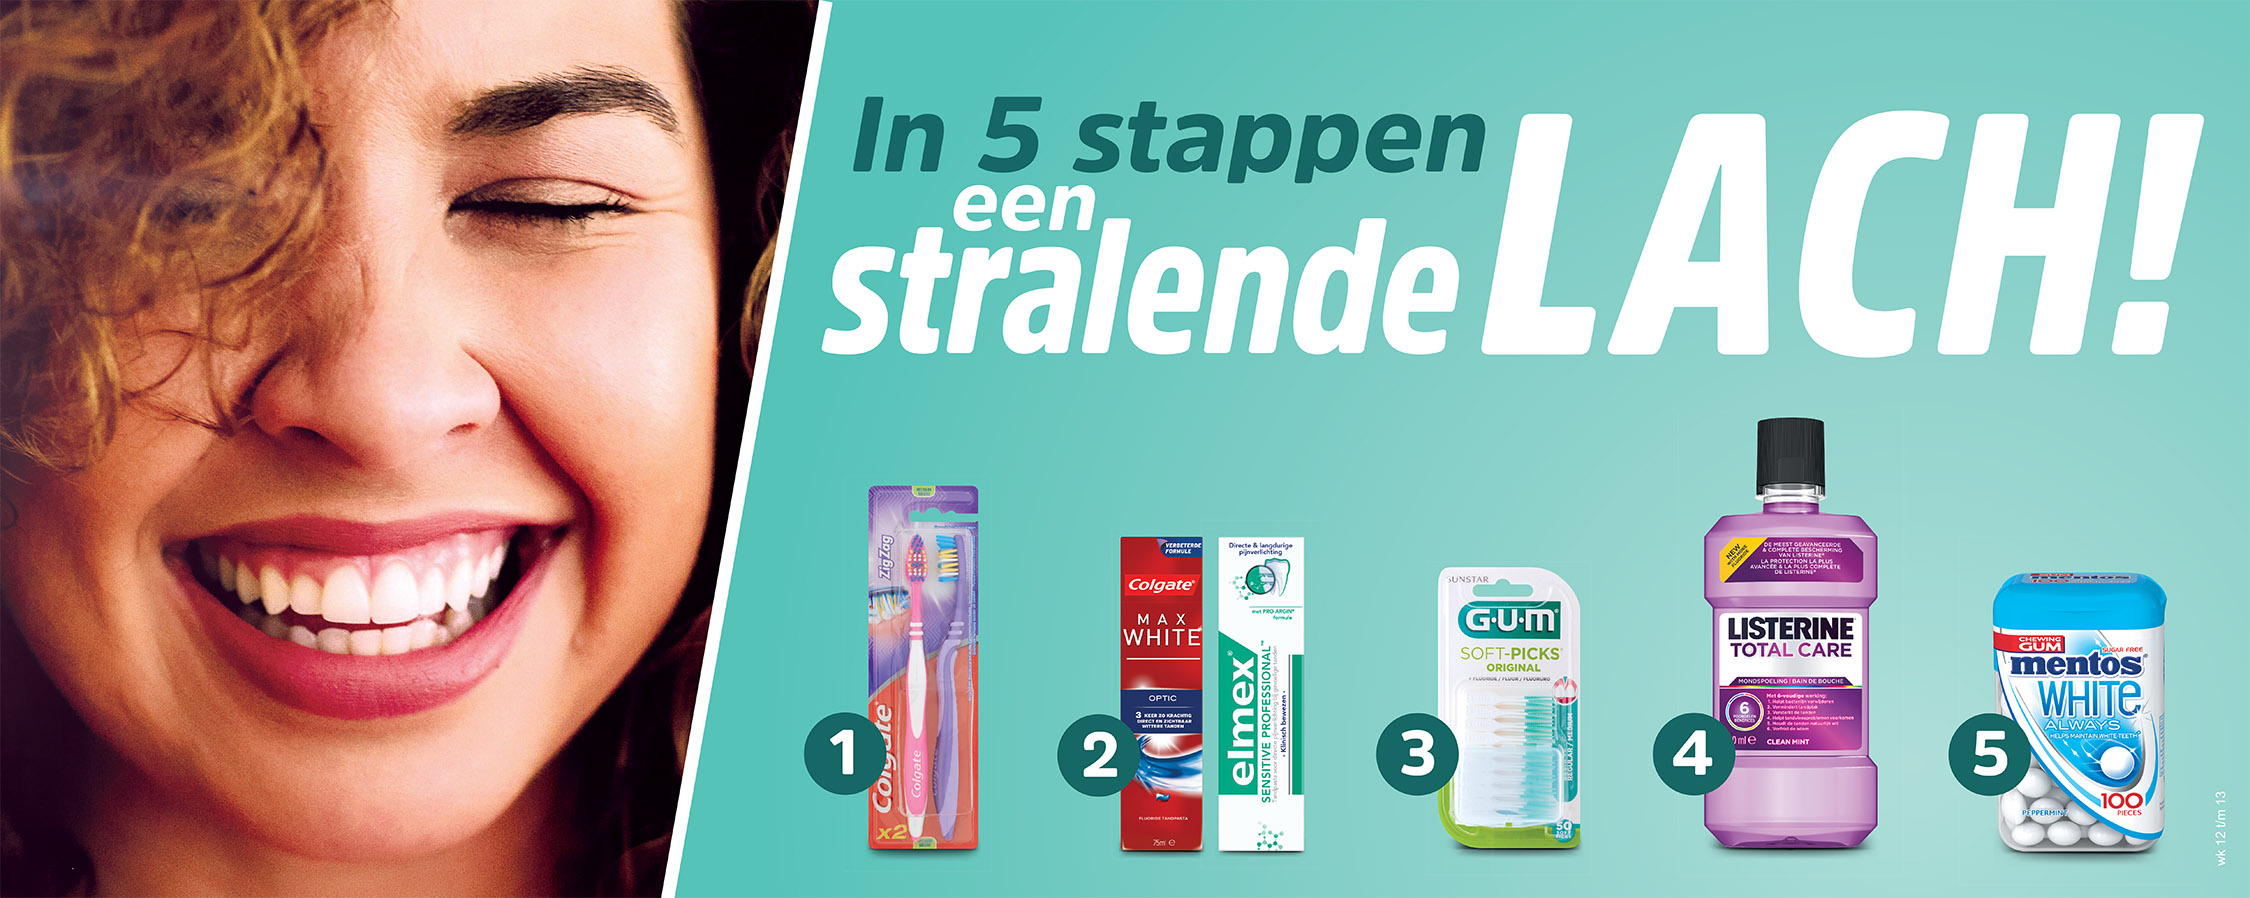 Campagne concept 'in 5 stappen een stralende lach'